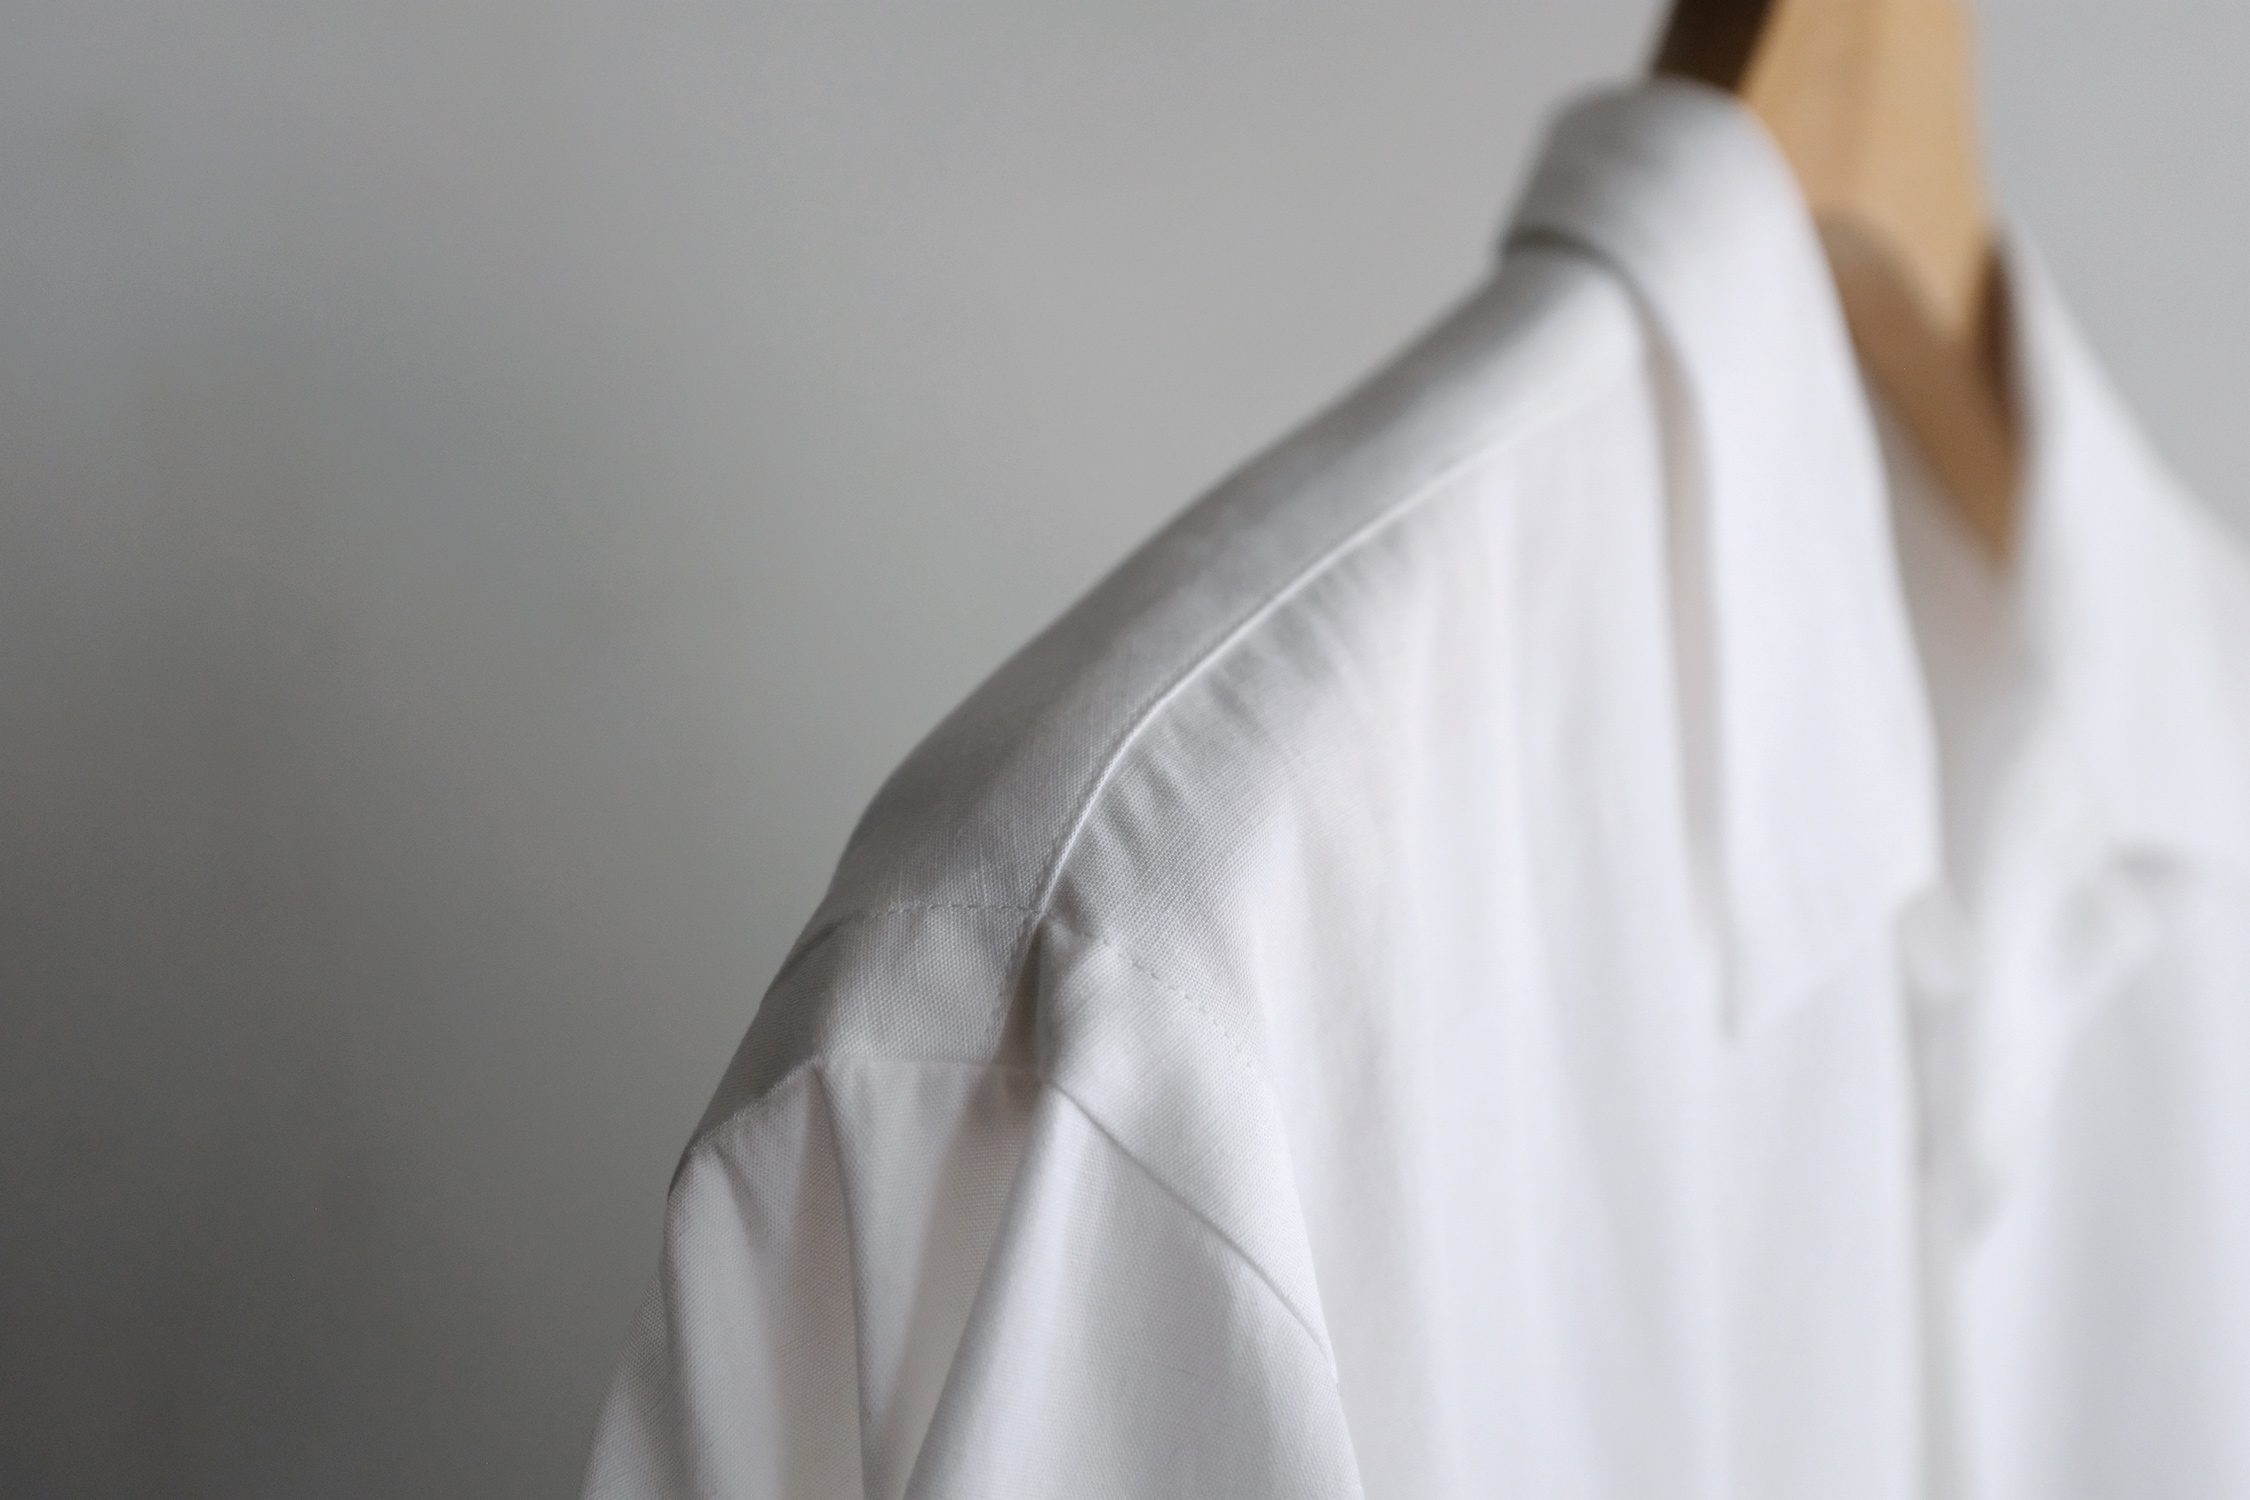 m's braque 20aw open collar shirts white